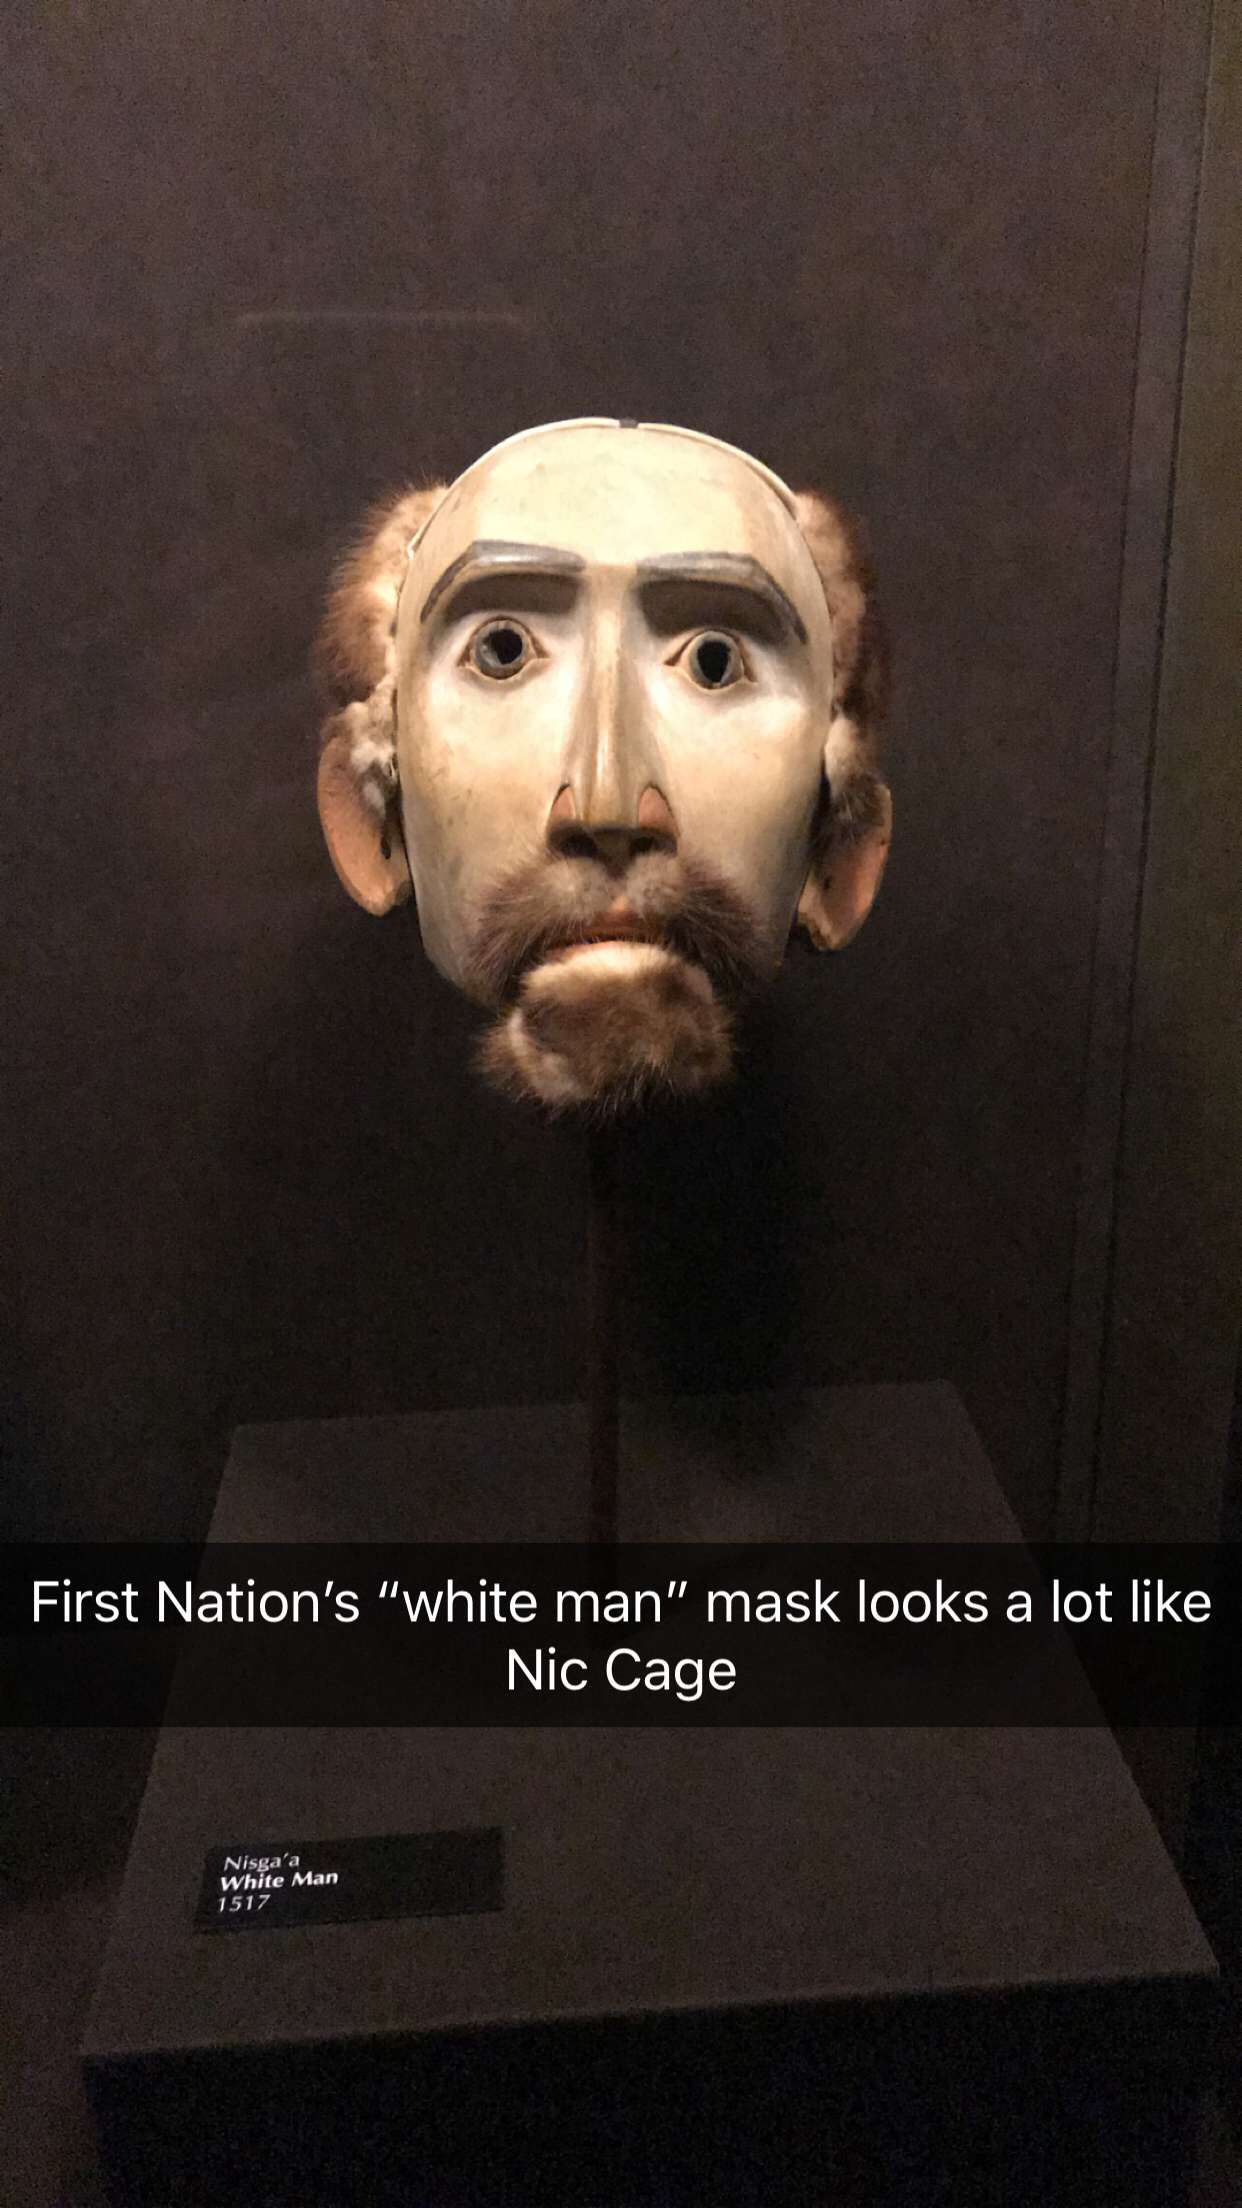 First Nations “White Man” mask looks a lot like Nic Cage